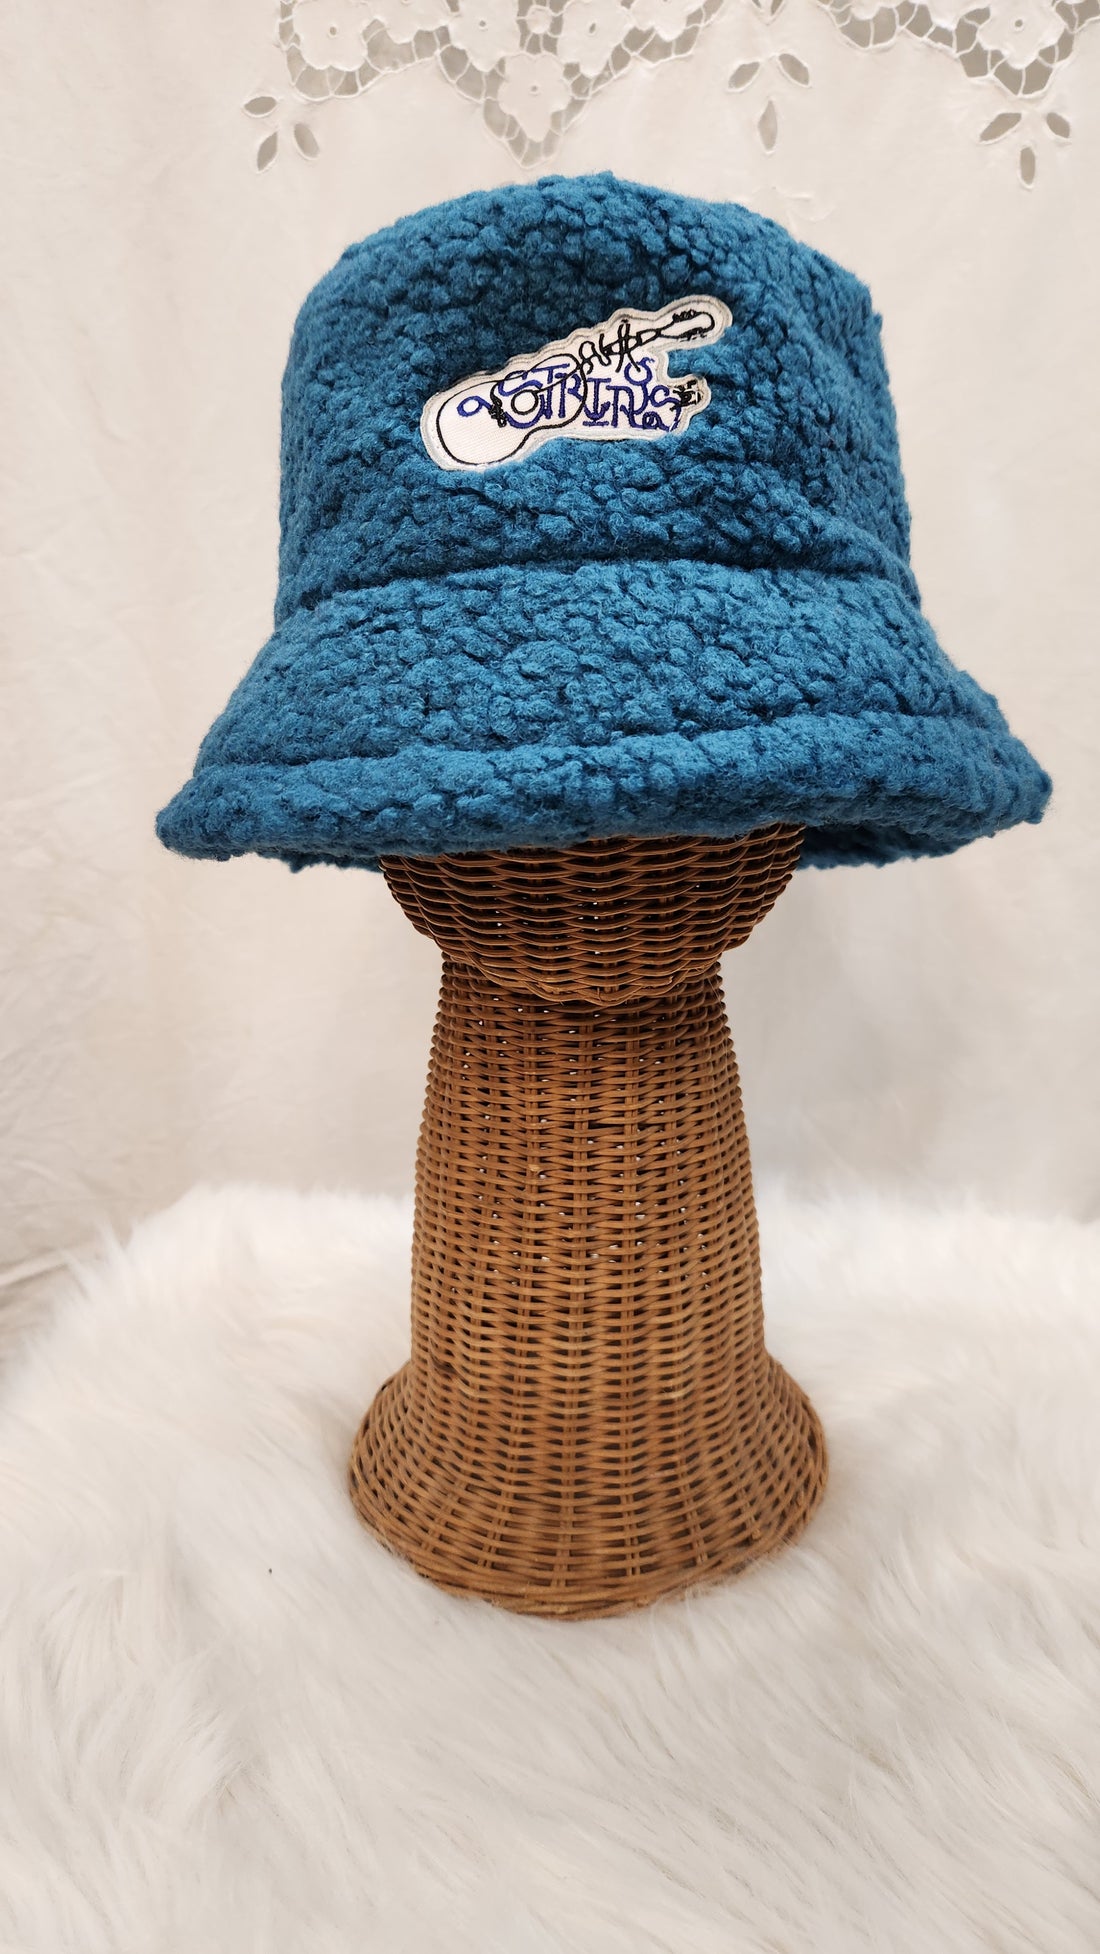 A blue Cashmere Bucket Hat hanged for display